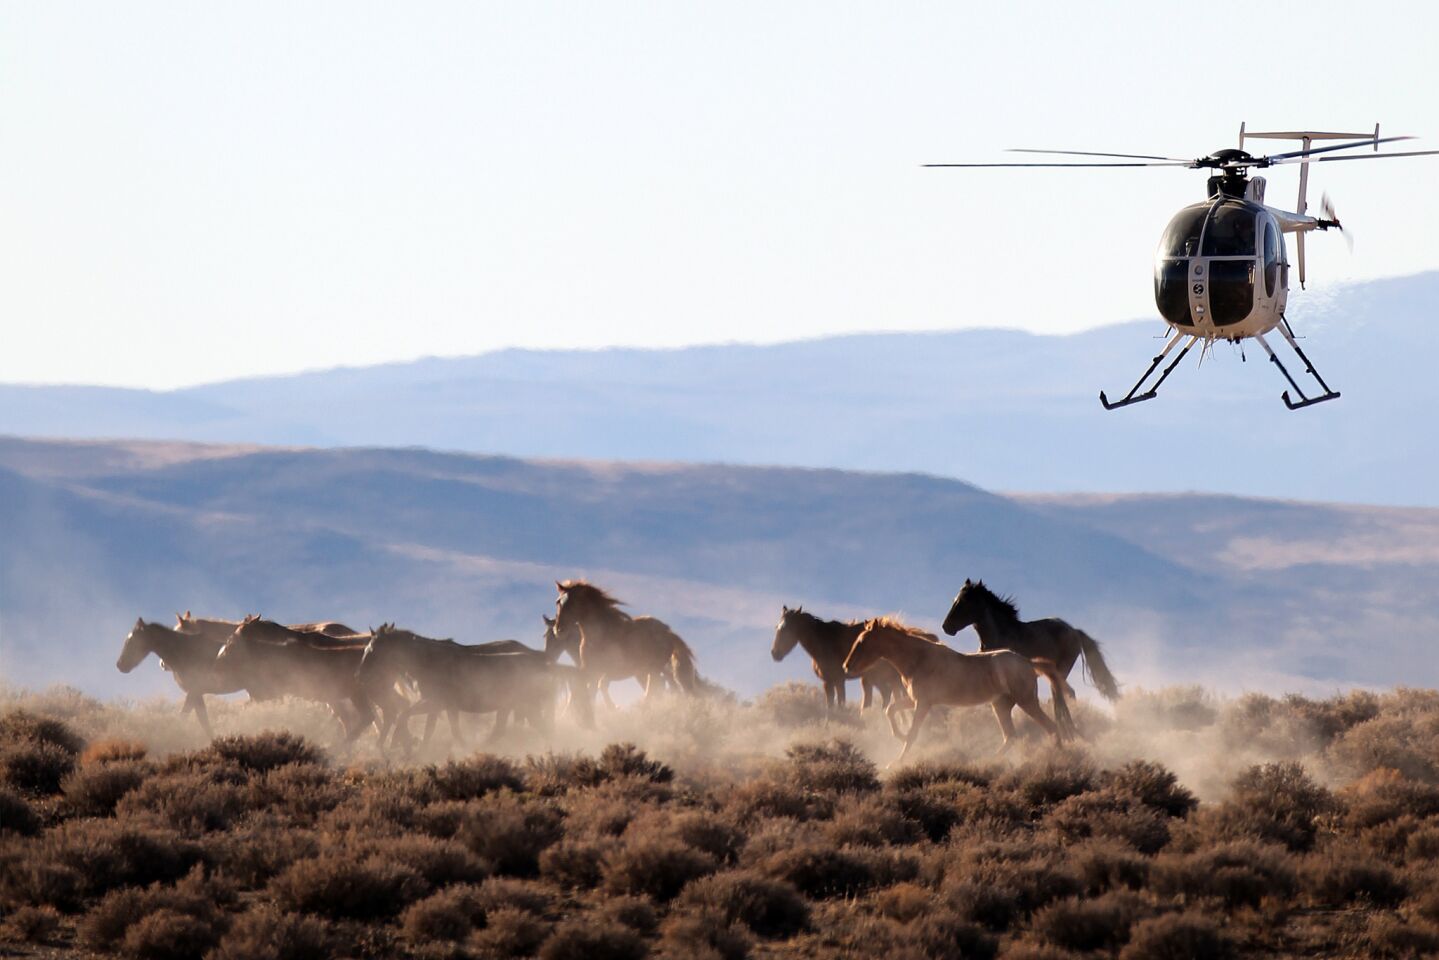 Wild mustangs are herded by helicopter into temporary corrals before they are hauled in trailers from public rangeland. They are then auctioned off or sent to live in government-funded holding areas.